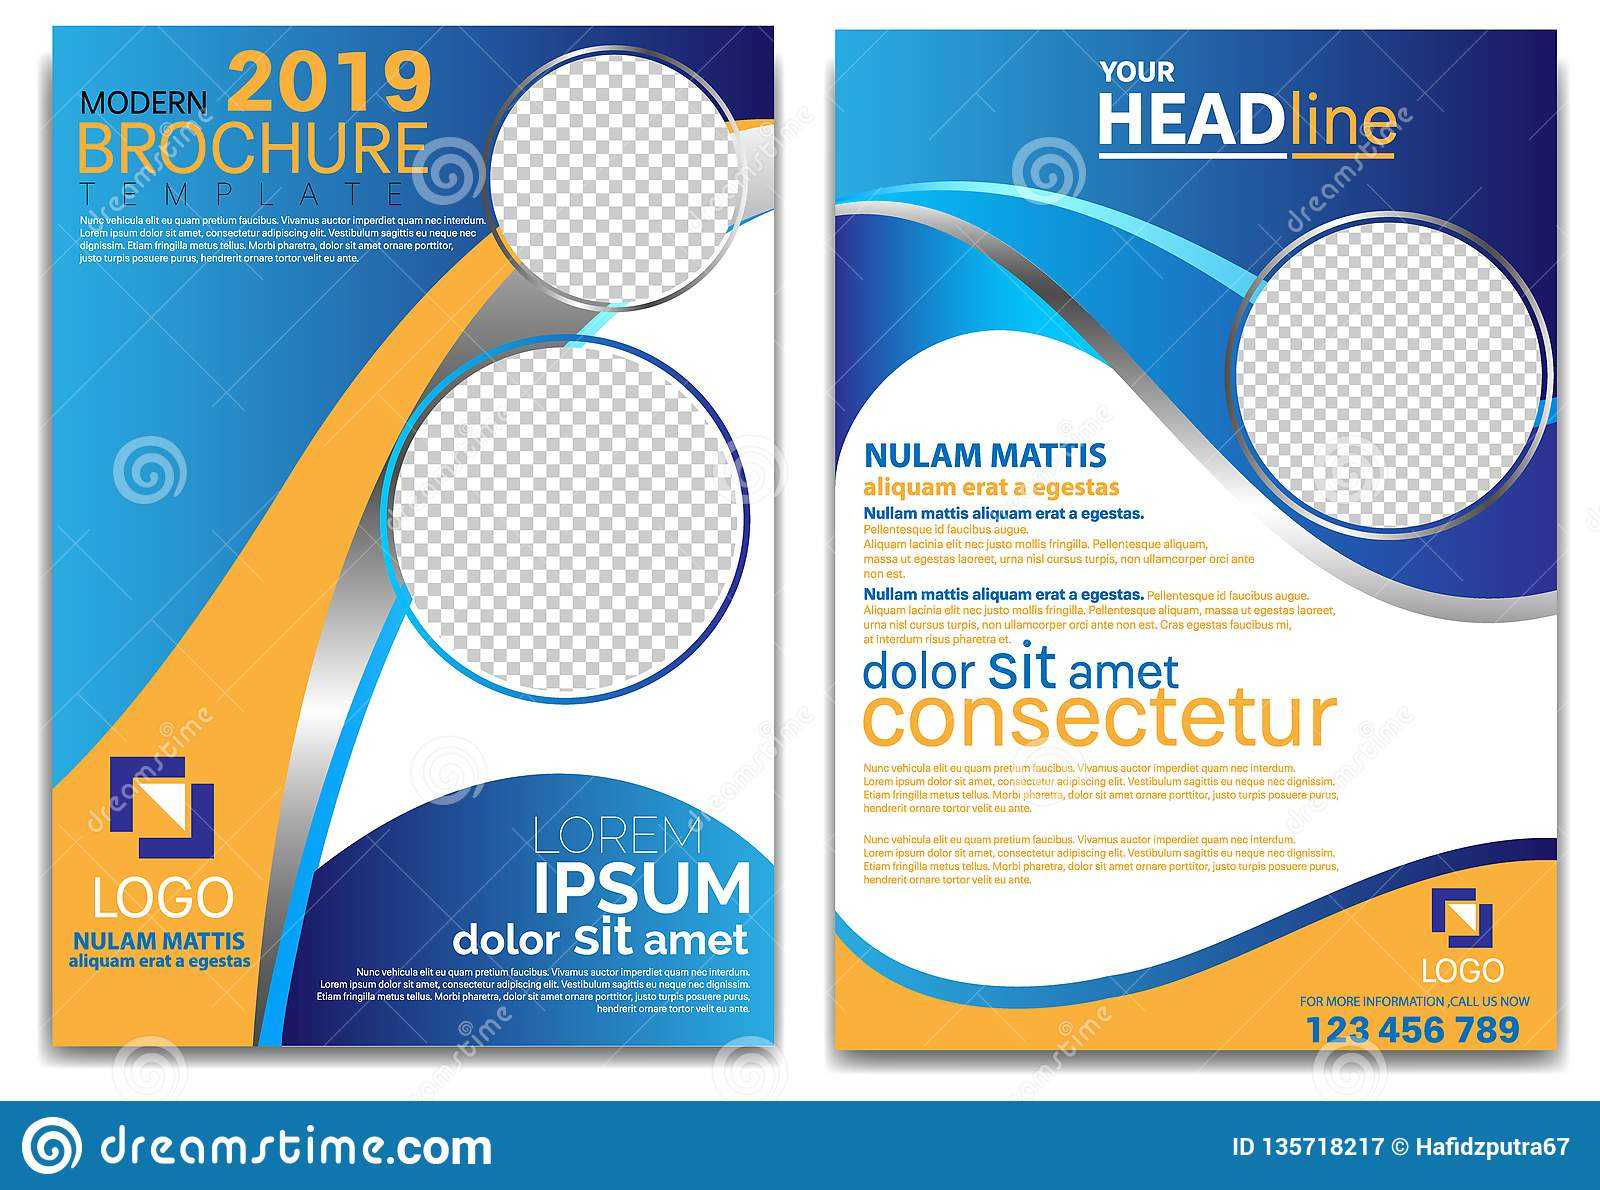 Modern Brochure Template 2019 And Professional Brochure Regarding School Brochure Design Templates